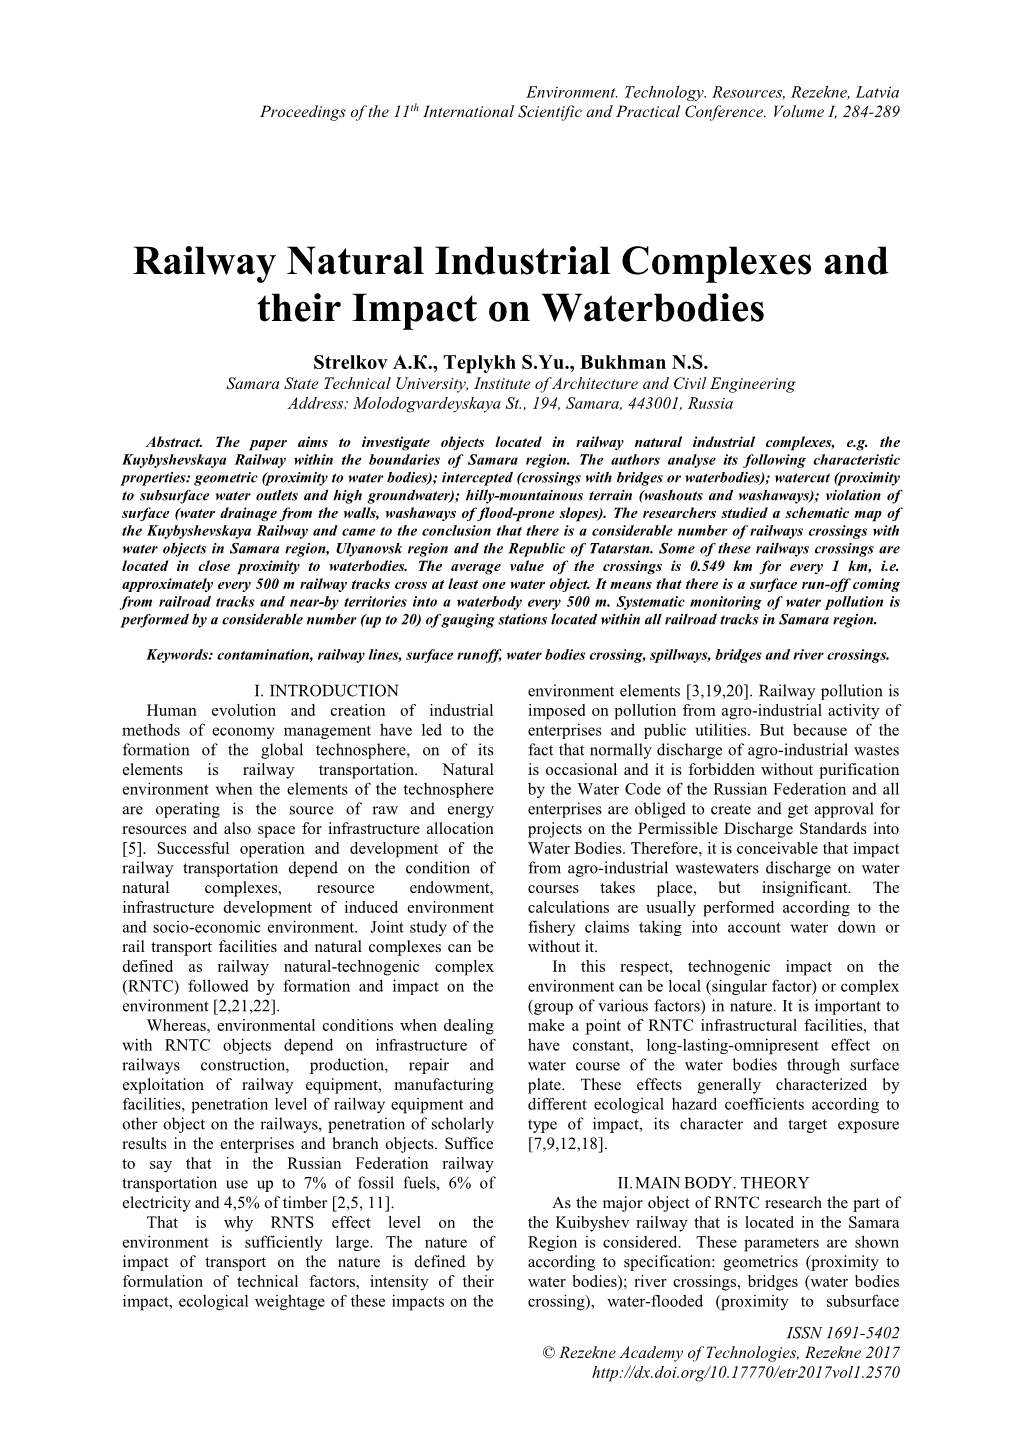 Railway Natural Industrial Complexes and Their Impact on Waterbodies